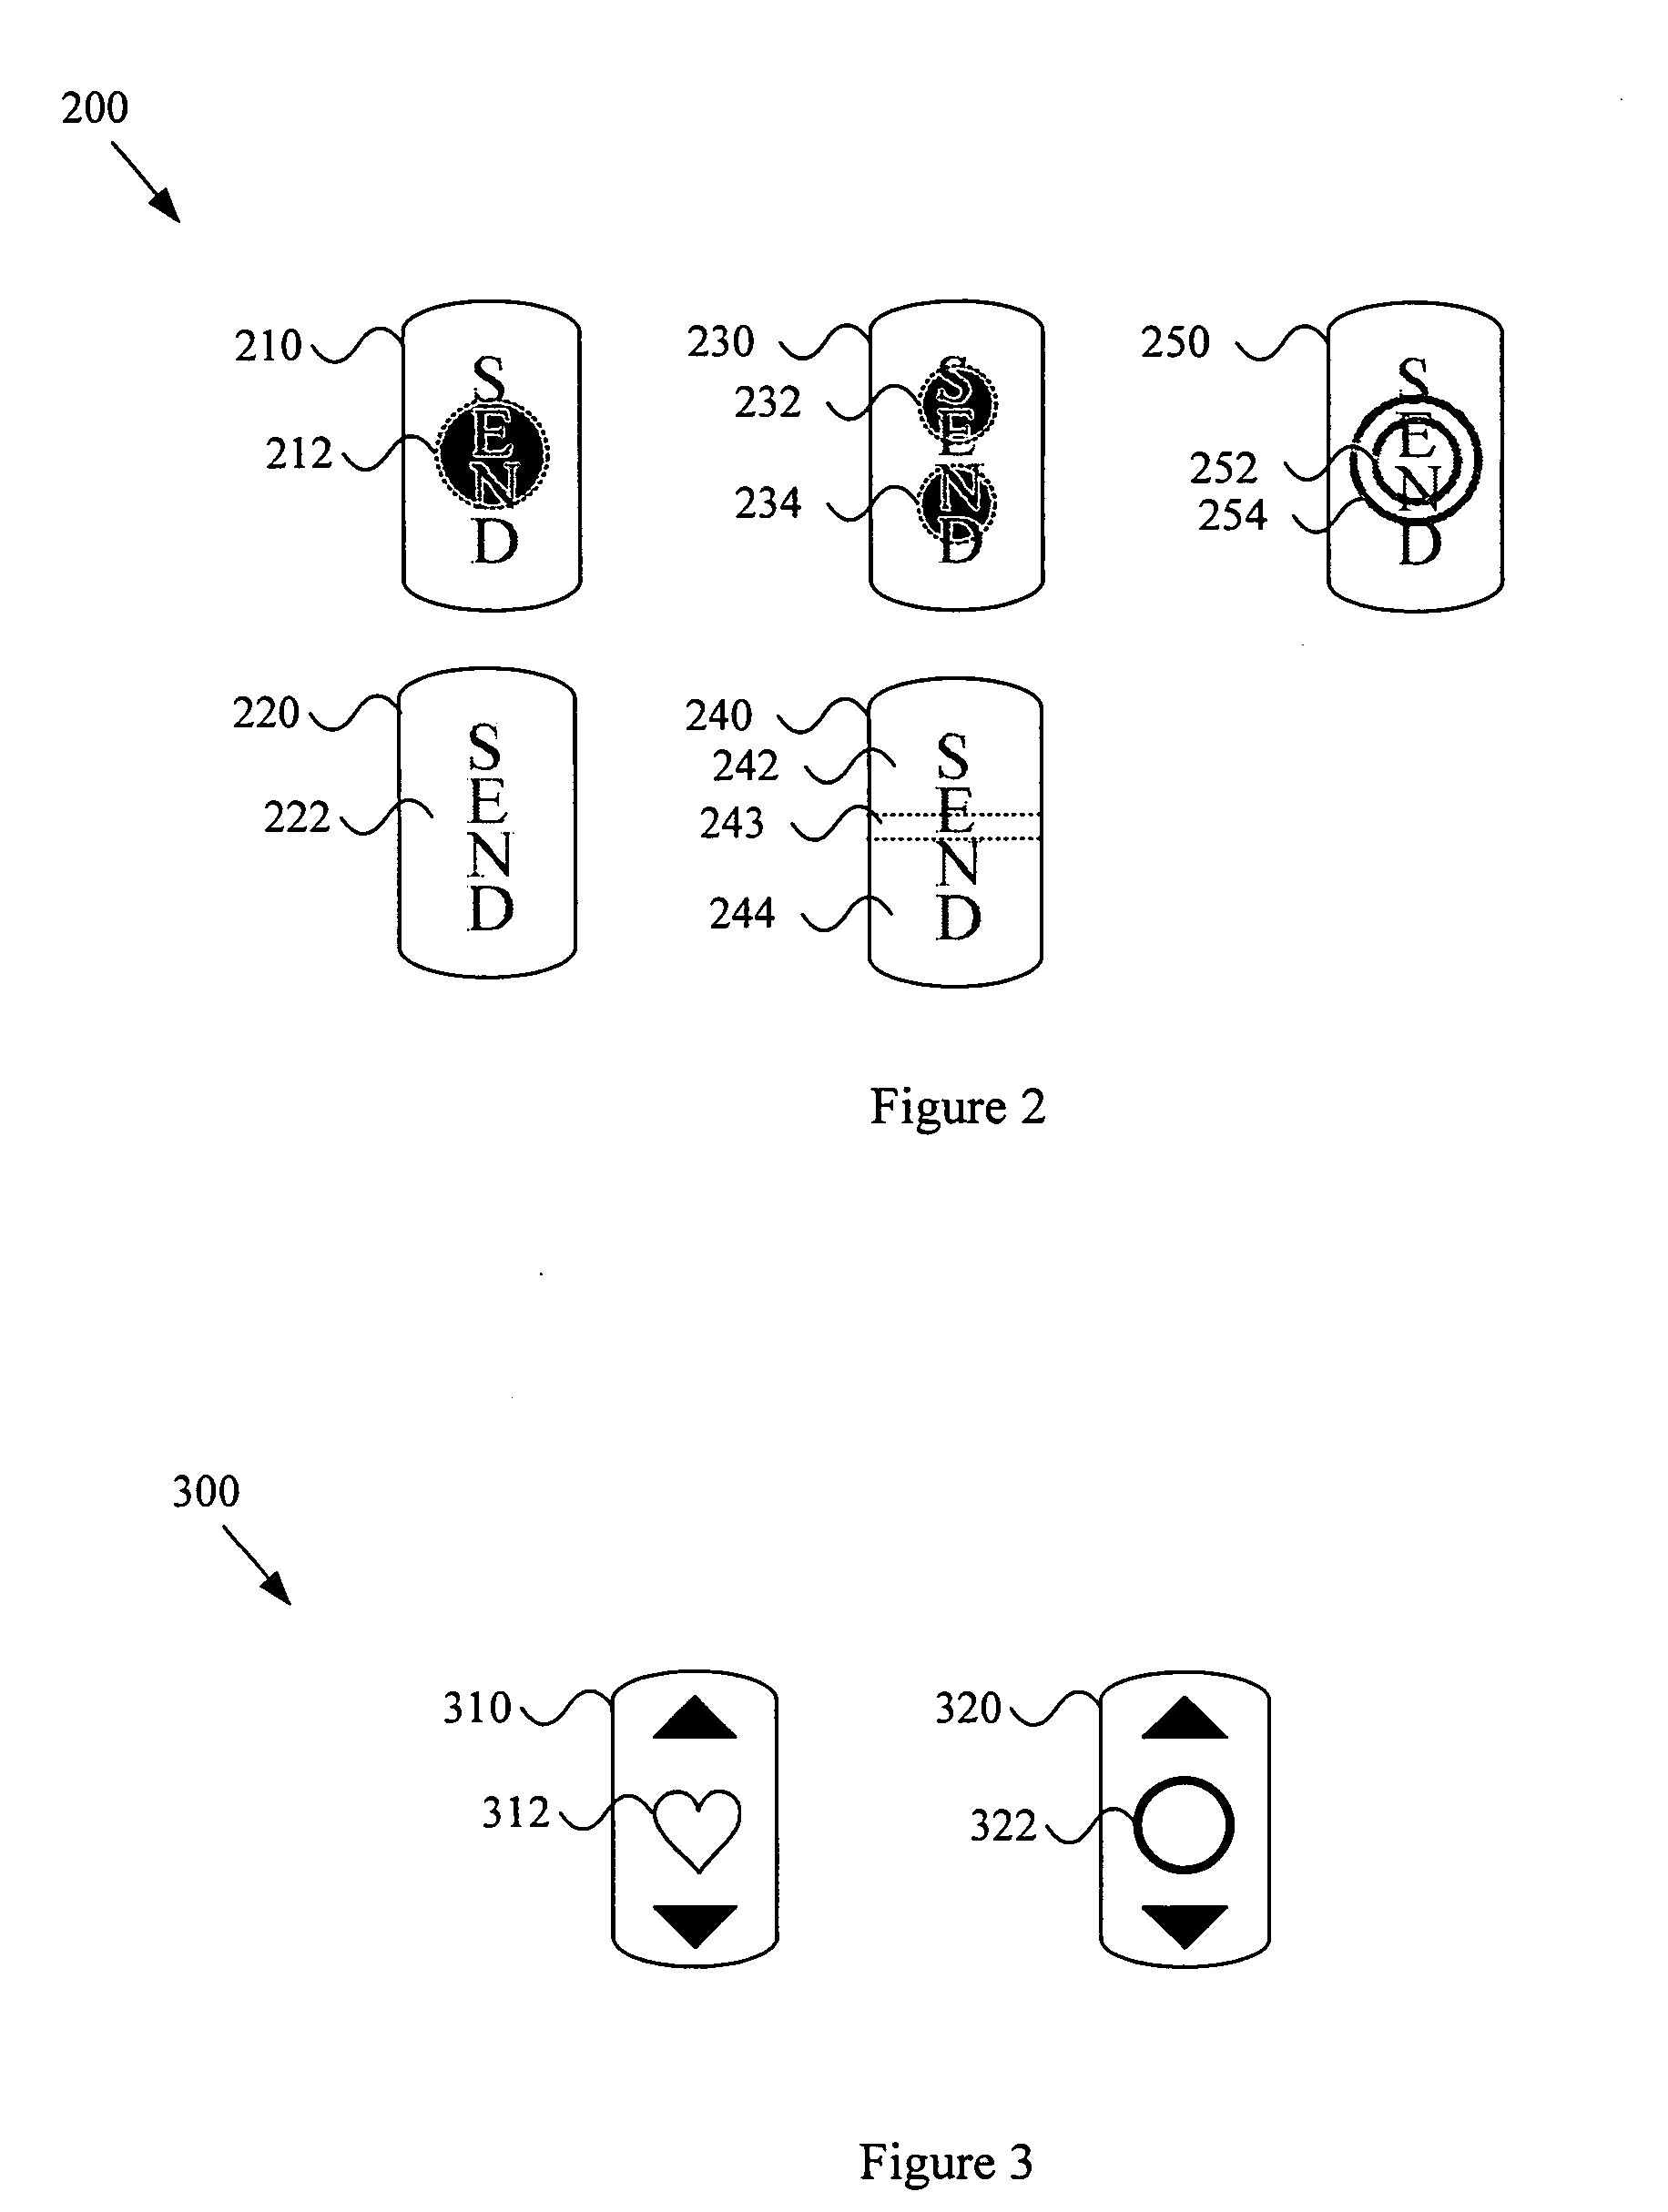 Mobile communication device and other devices with cardiovascular monitoring capability